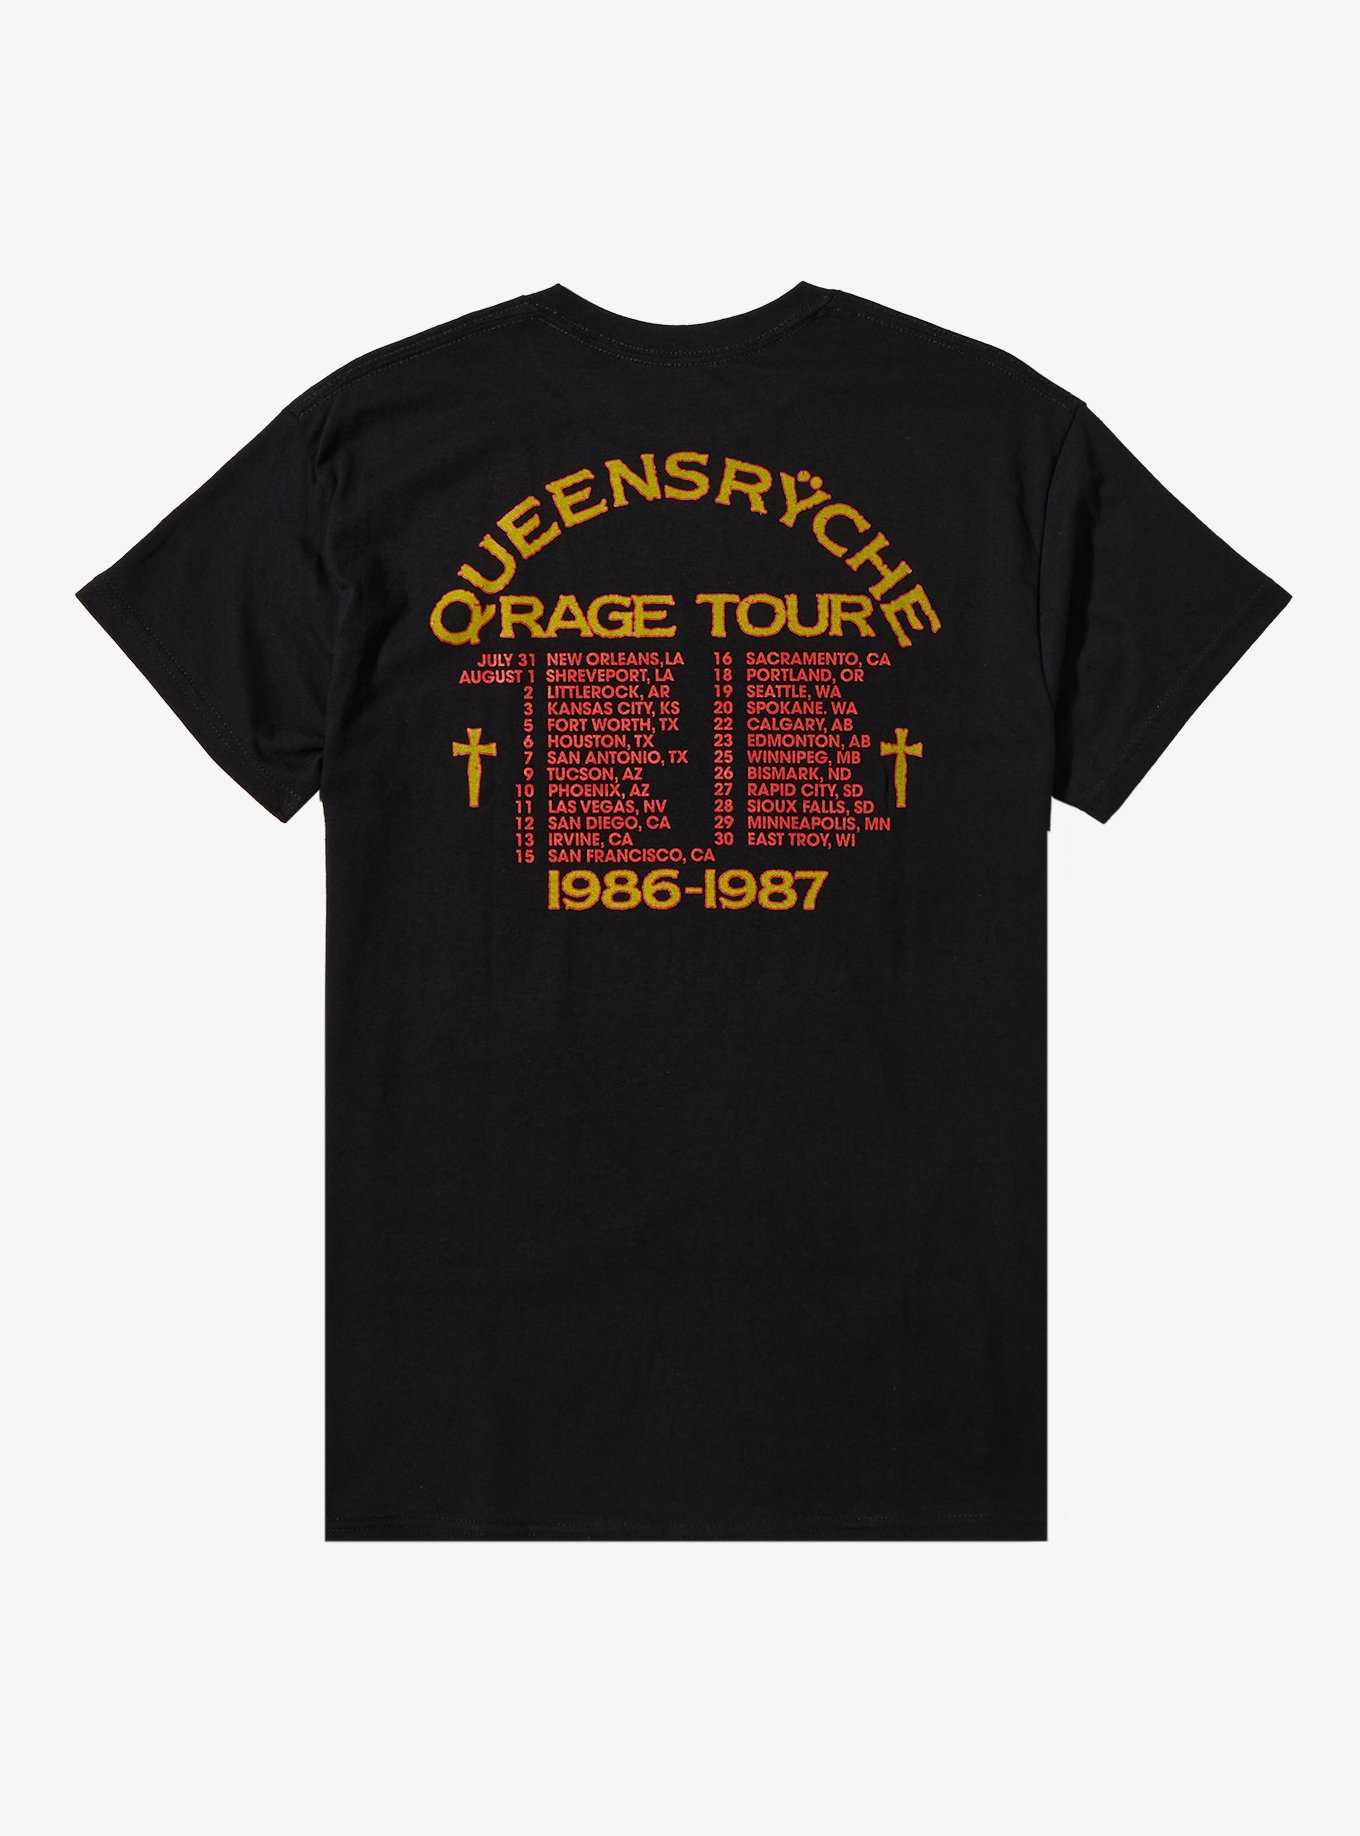 Queensryche Rage For Order Tour T-Shirt, , hi-res